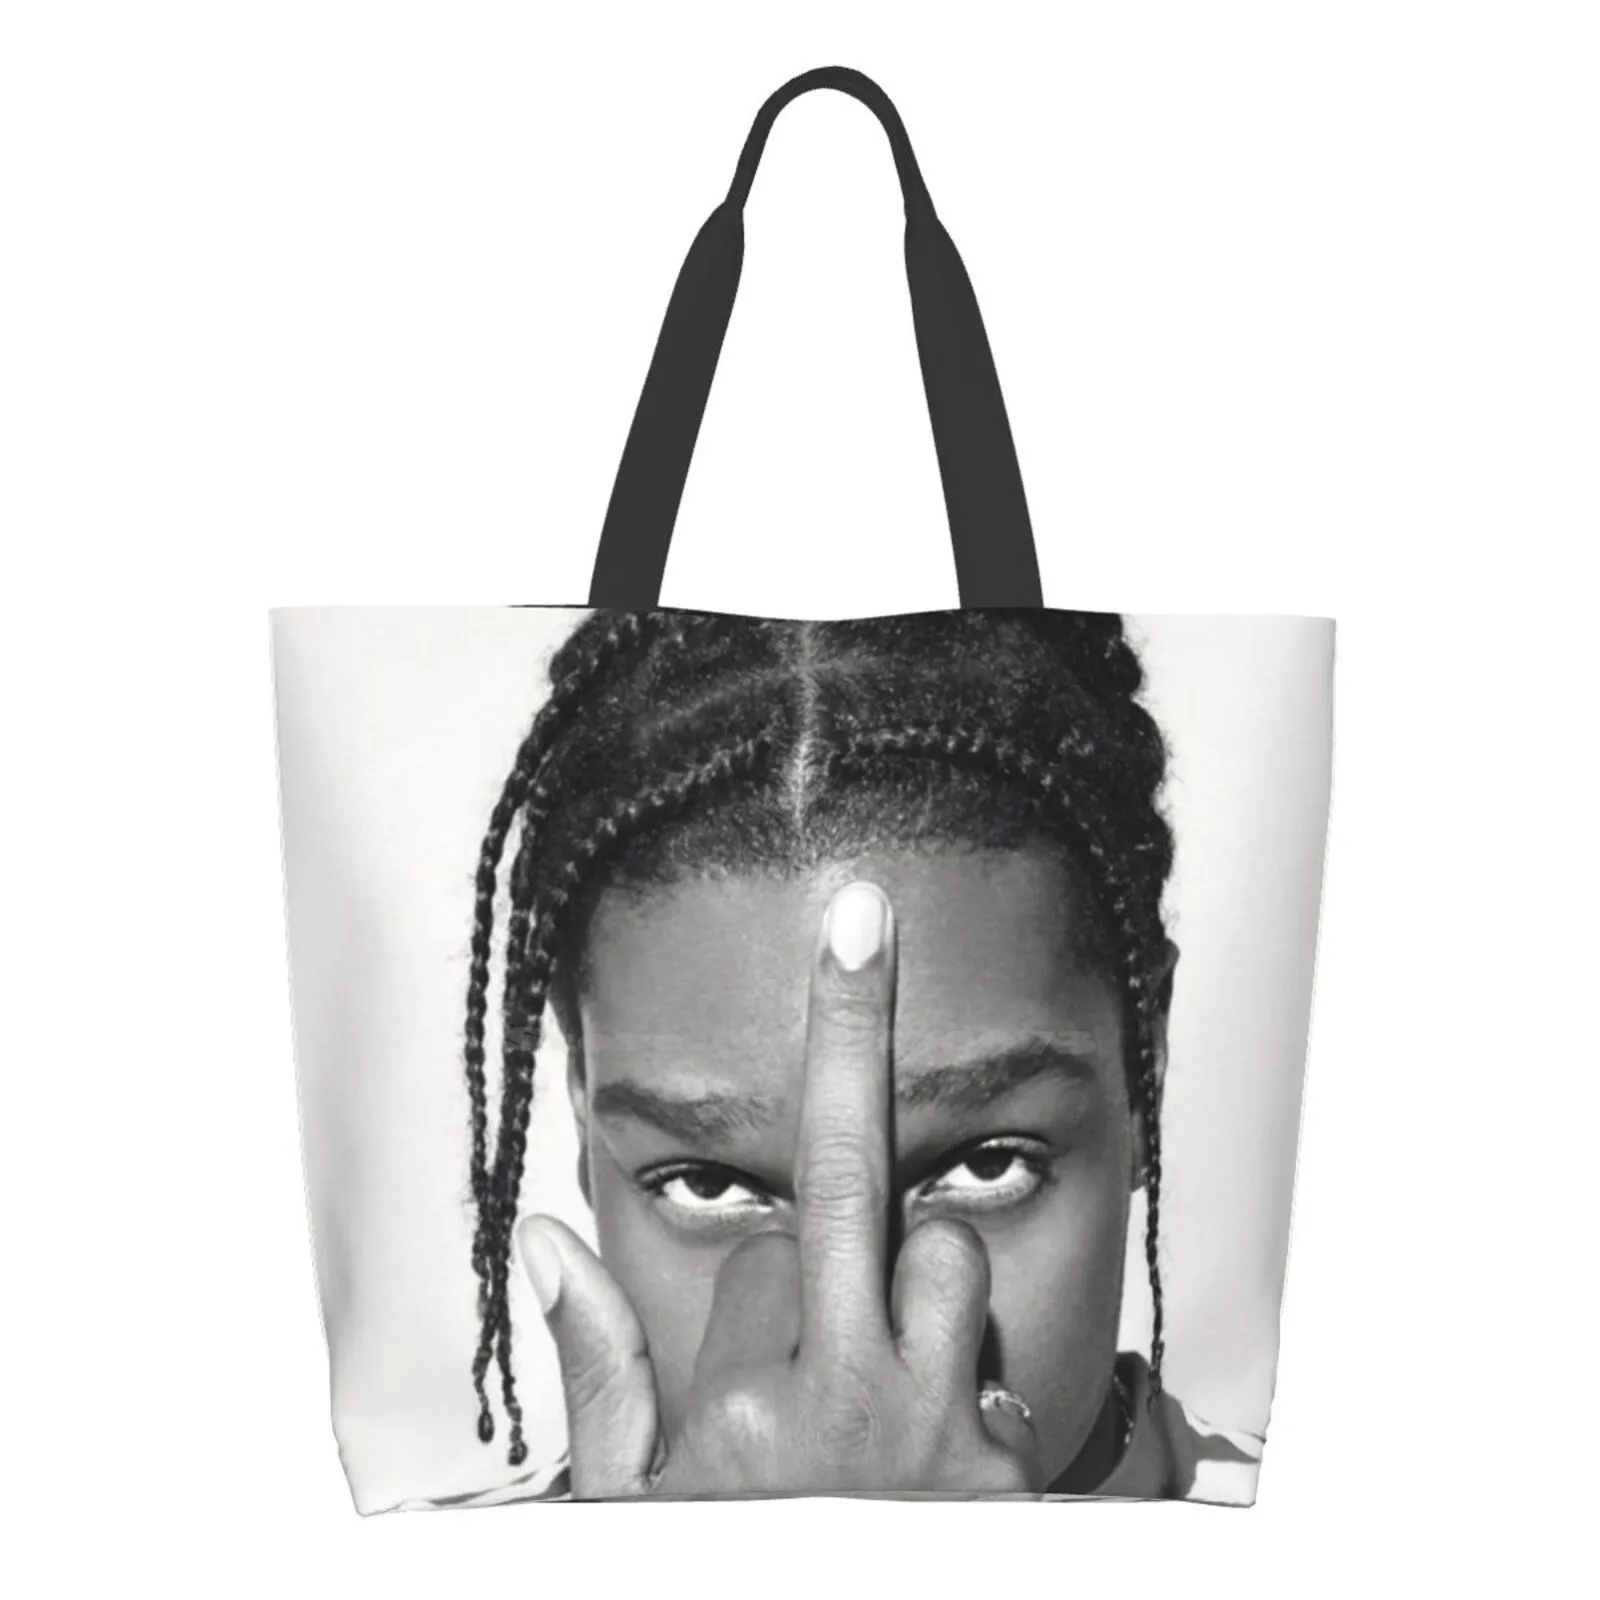 

Finger Reusable Household Tote Bags Storage Bags Teen Rap Hop Popular Young Music Hiphop Hip